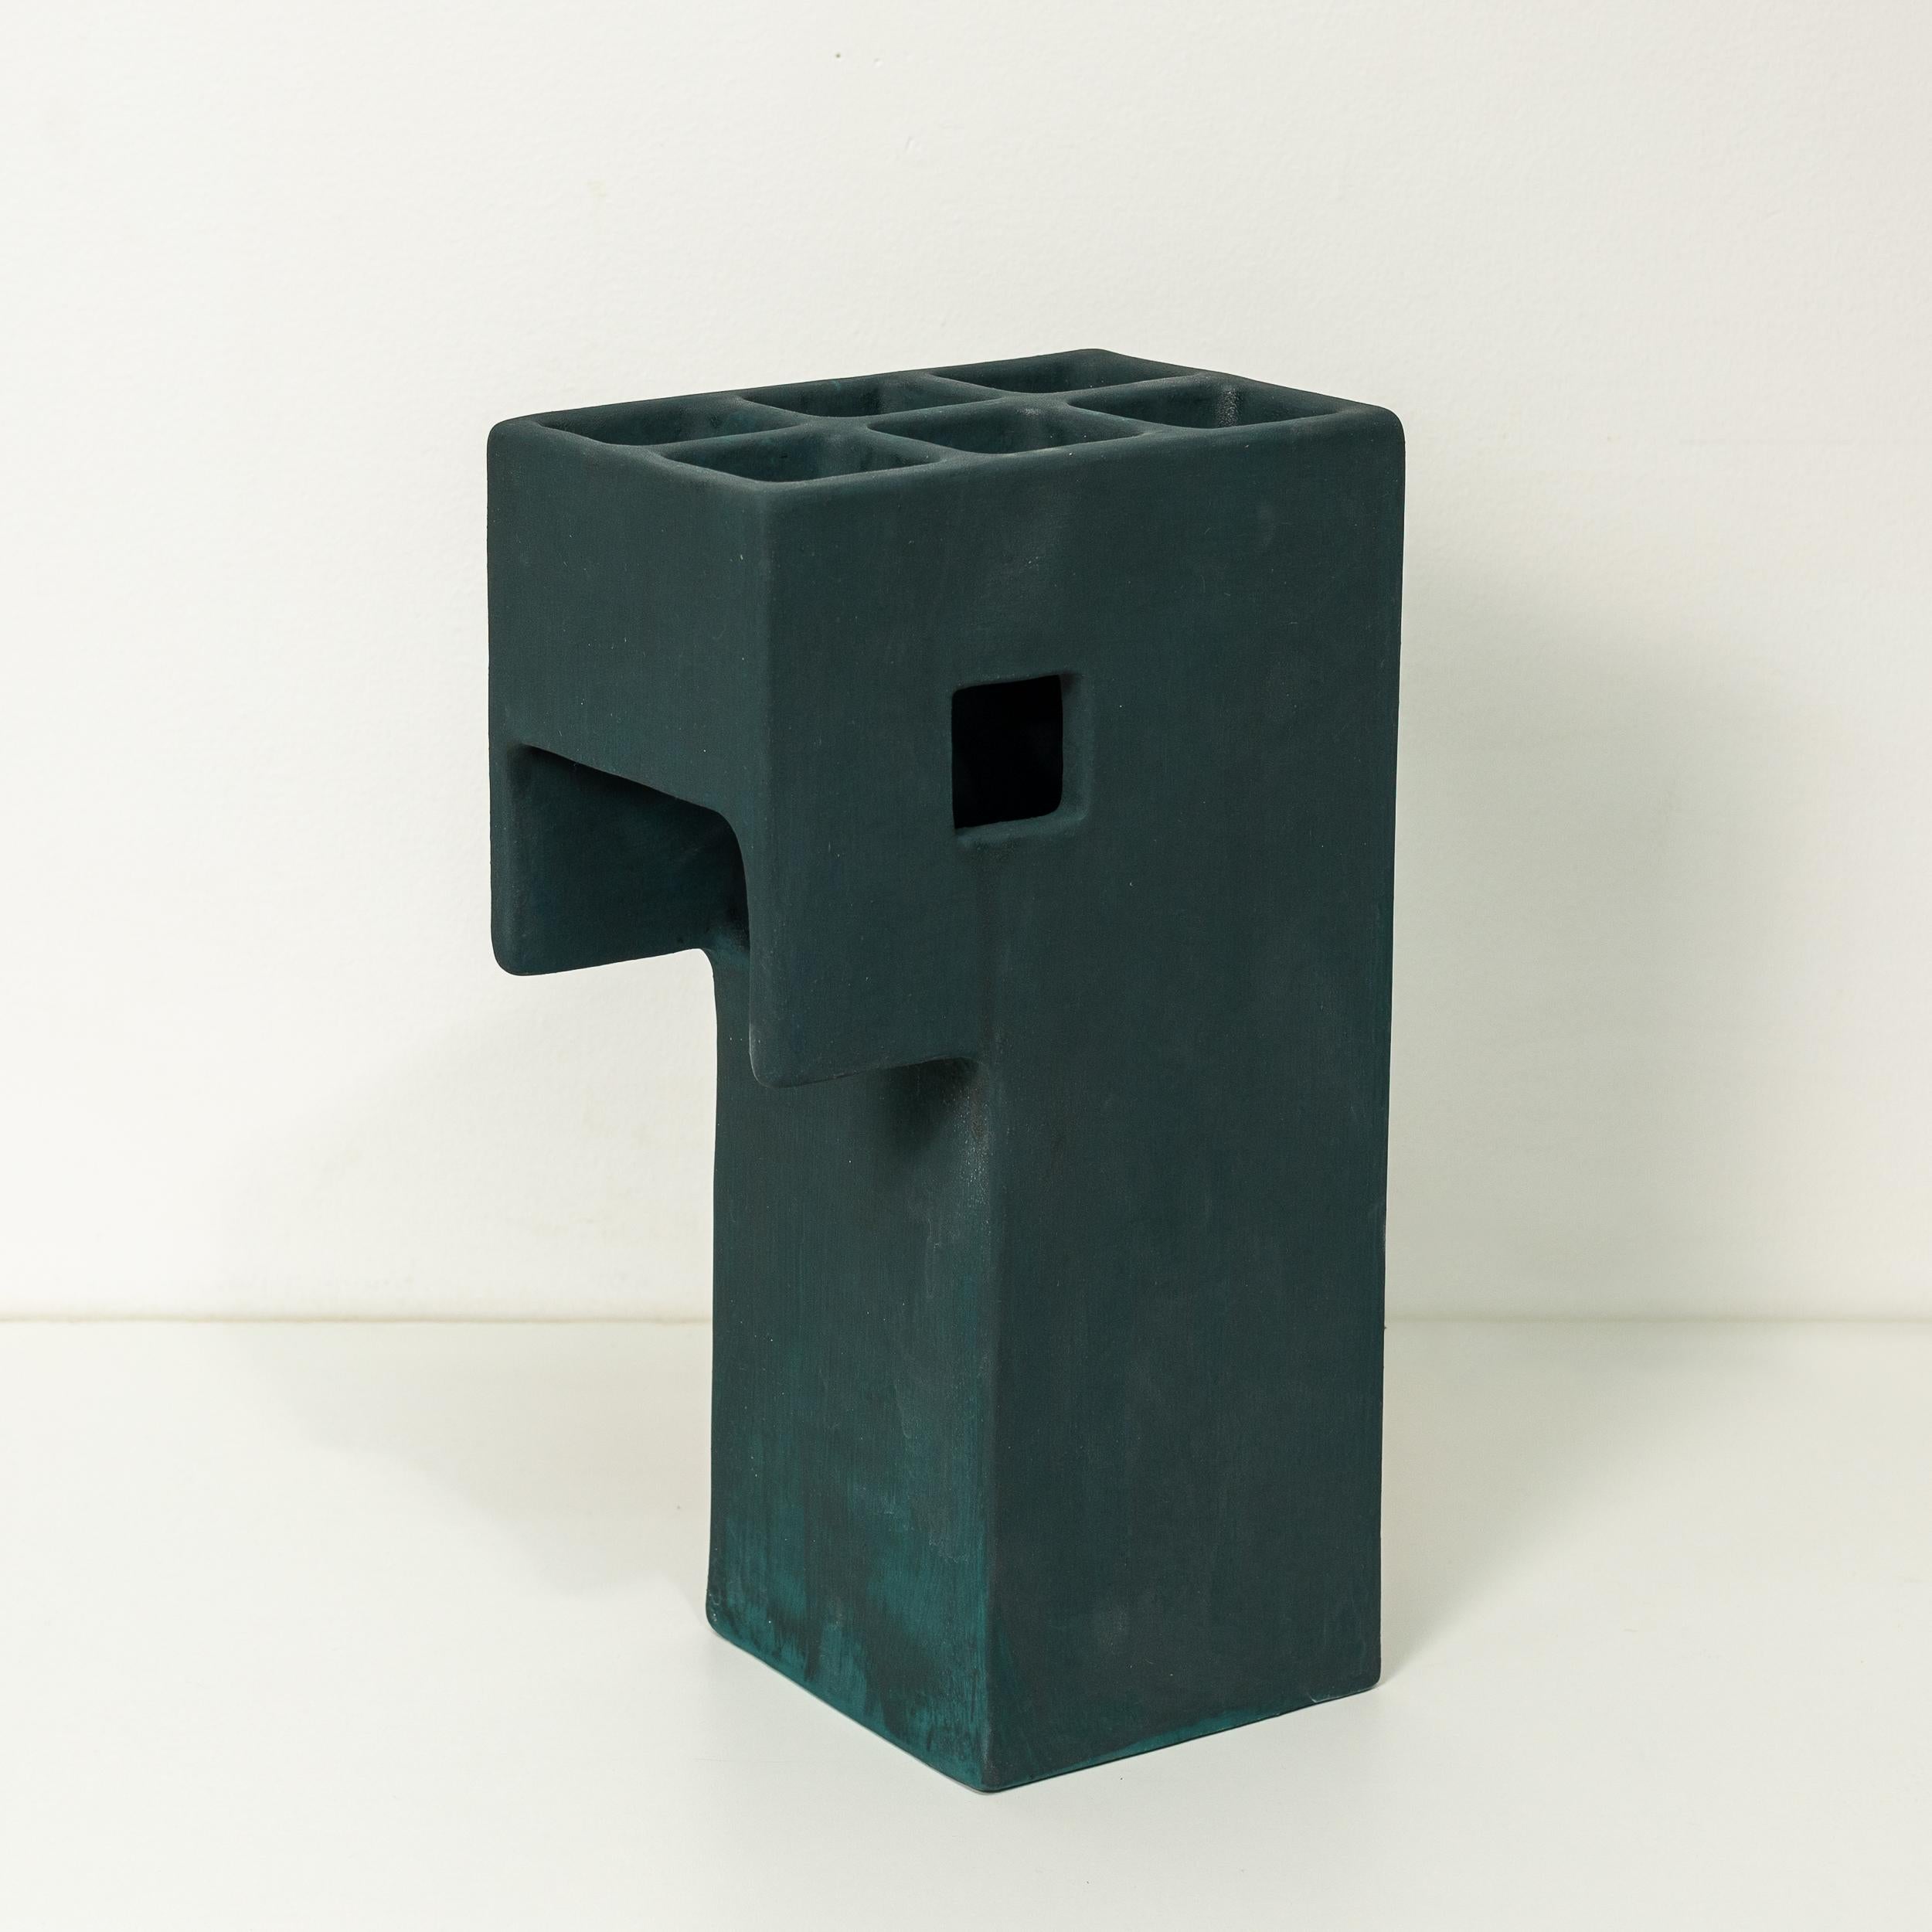 Hand-Crafted Ding Dong Table Lamp by Luft Tanaka, ceramic, dark green, brutalist, geometric For Sale